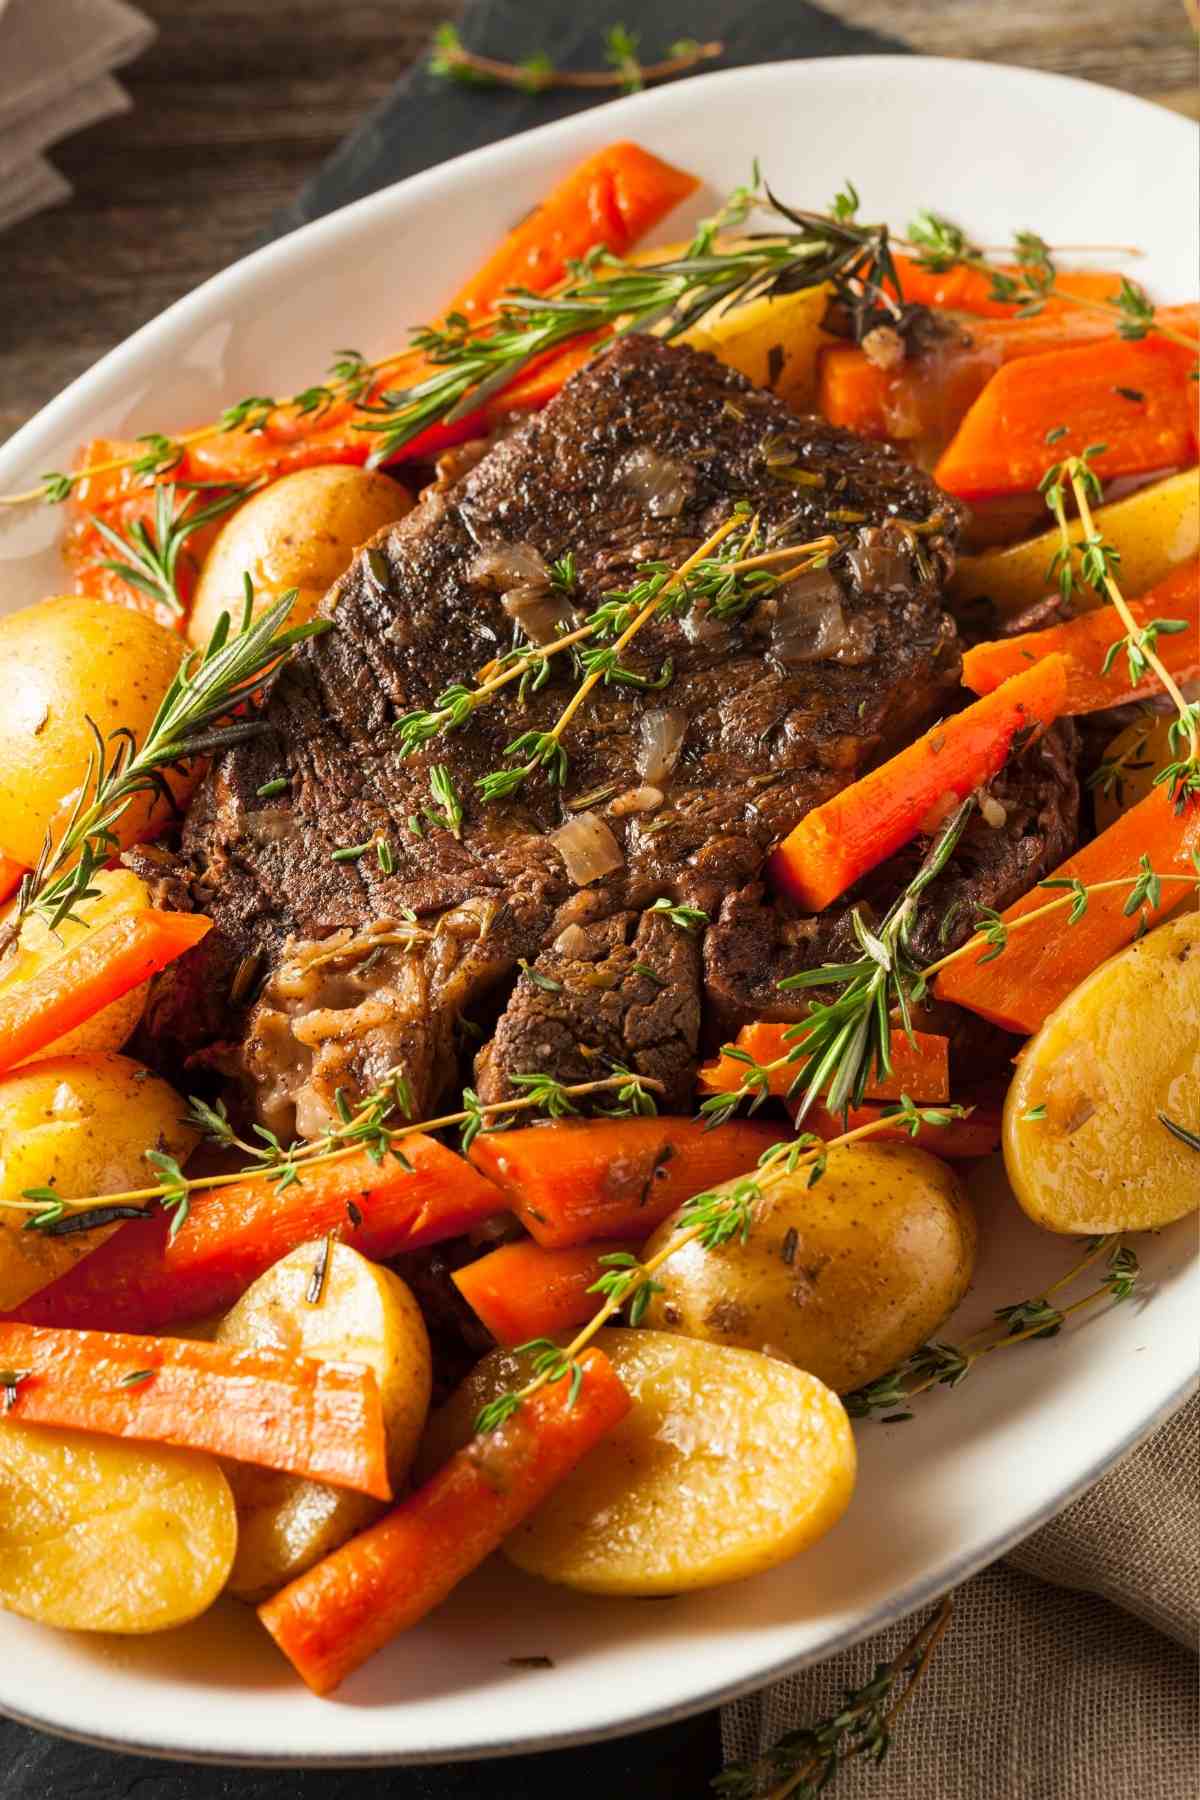 This Top Sirloin Roast is perfect for a Sunday dinner. It’s moist, tender, and loaded with delicious beefy flavors.